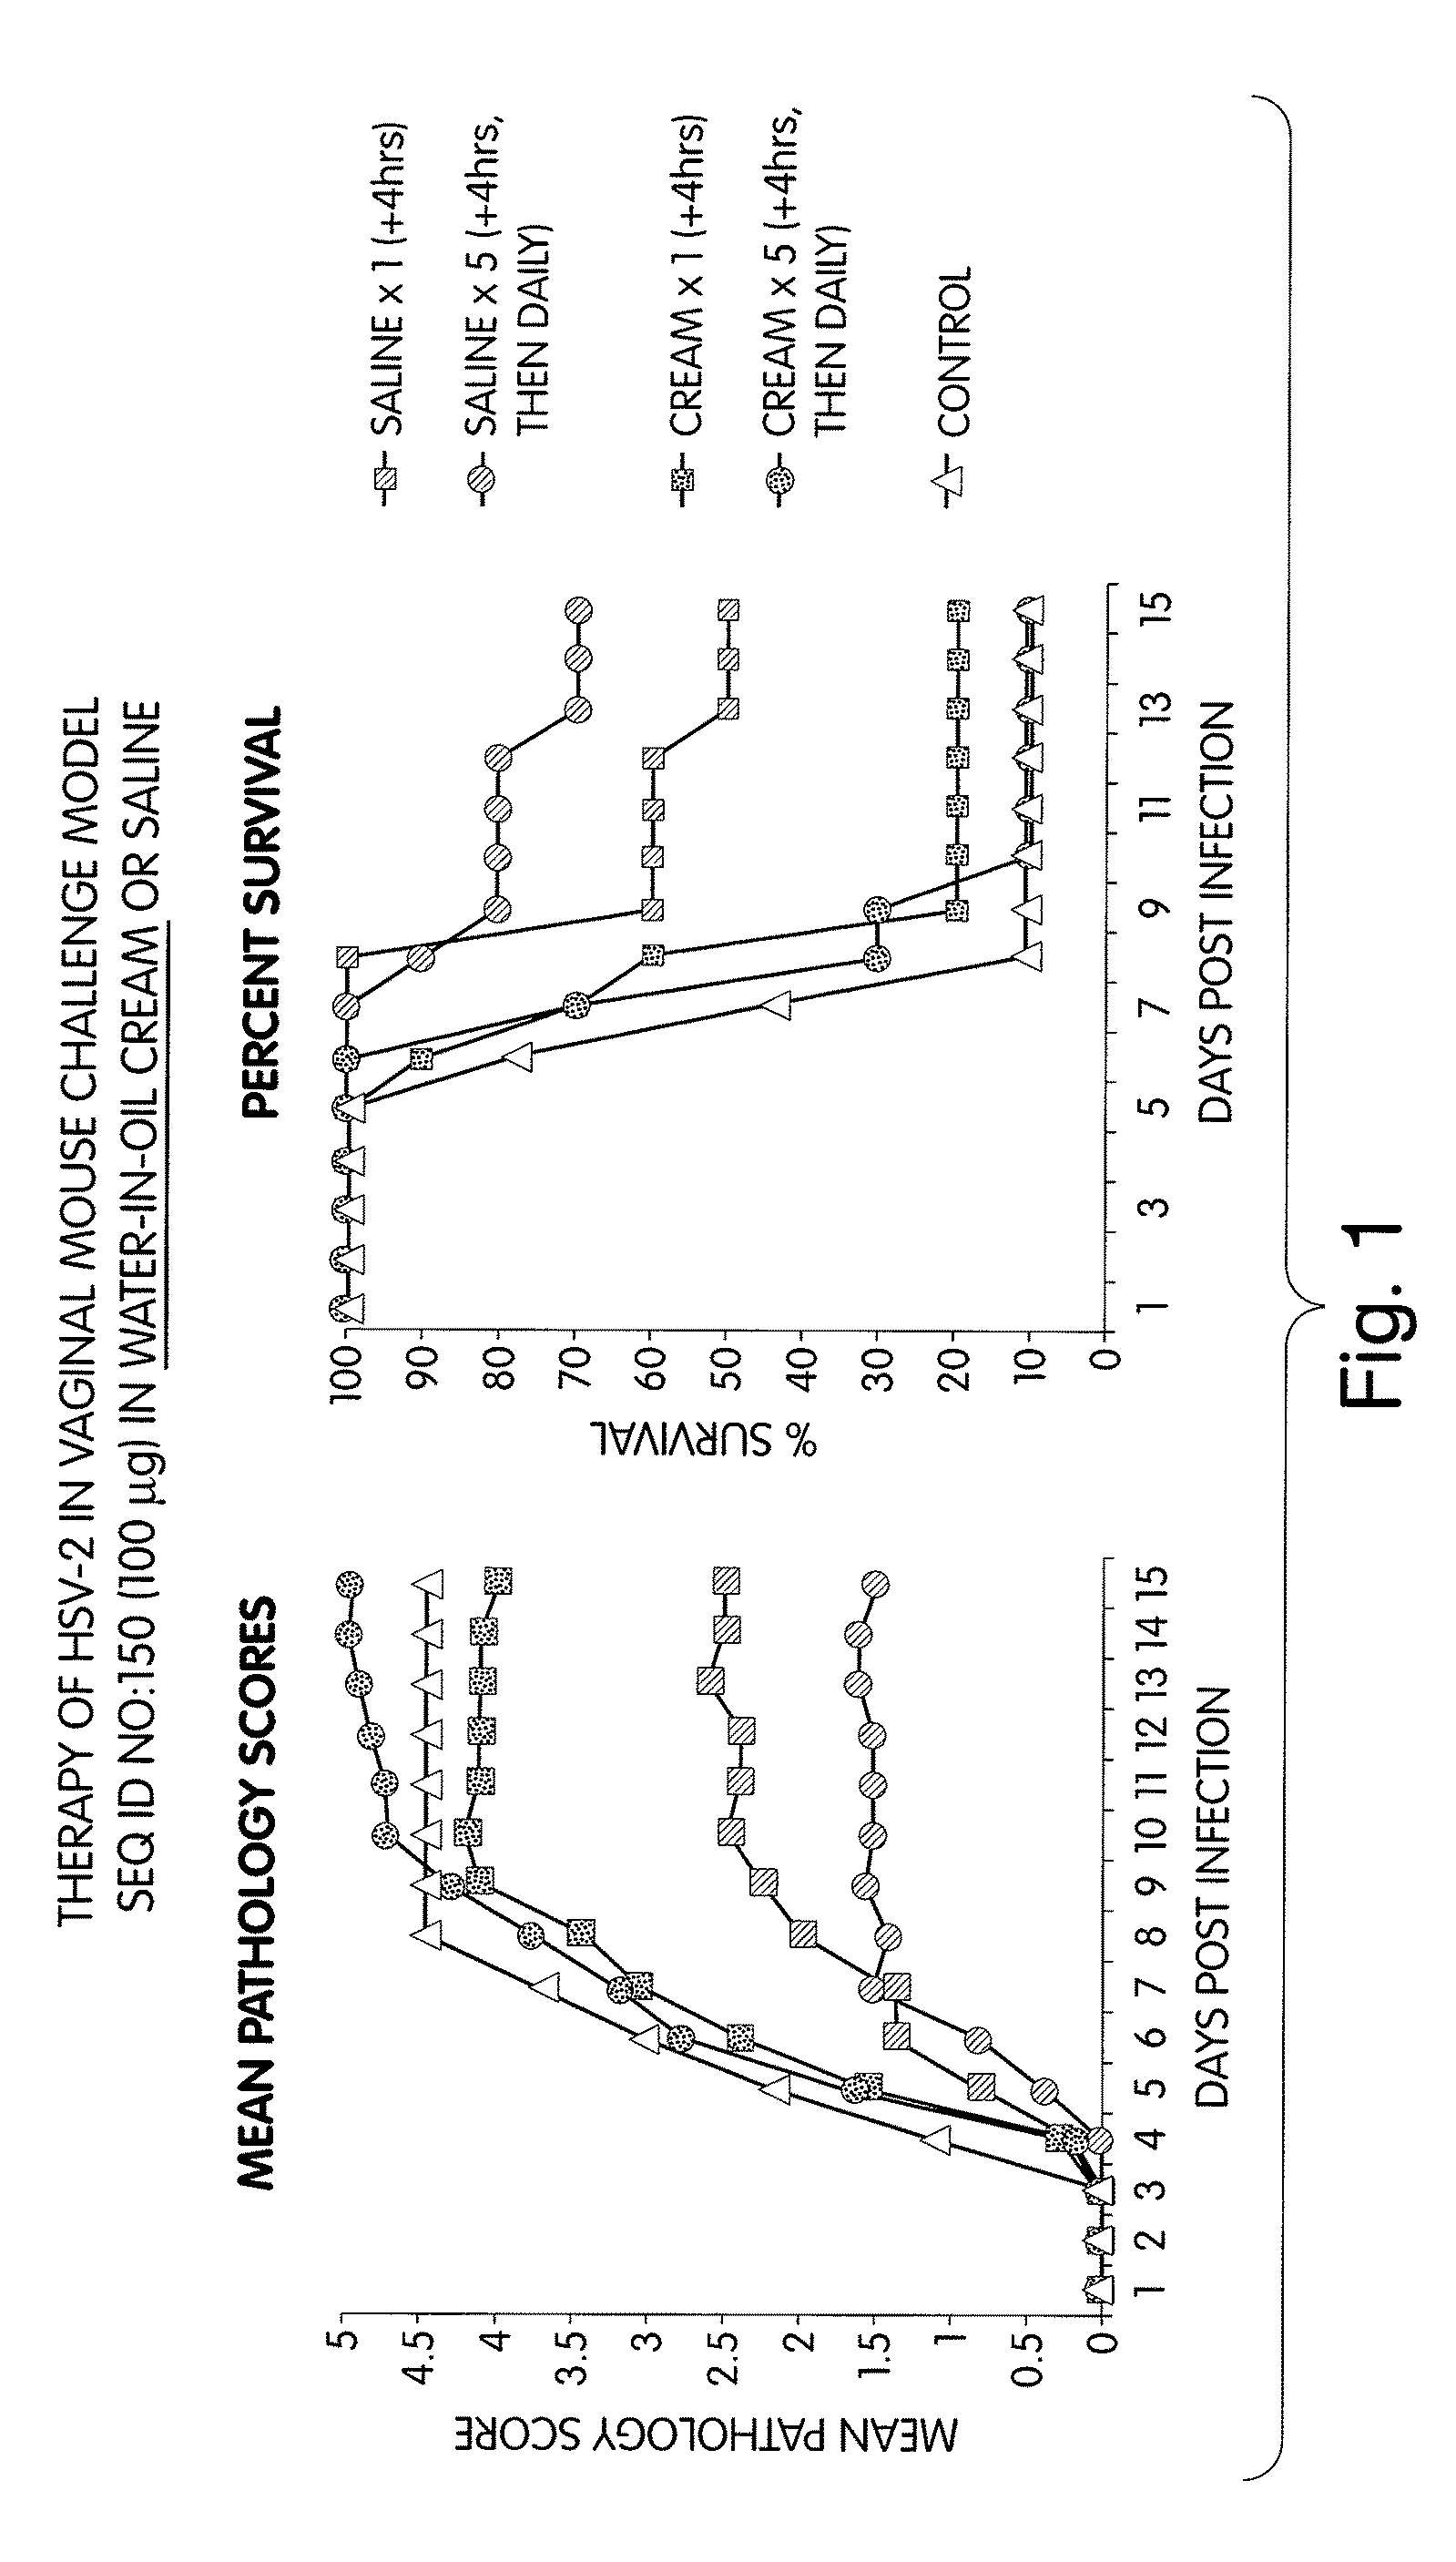 Immunostimulatory nucleic acid oil-in-water formulations and related methods of use